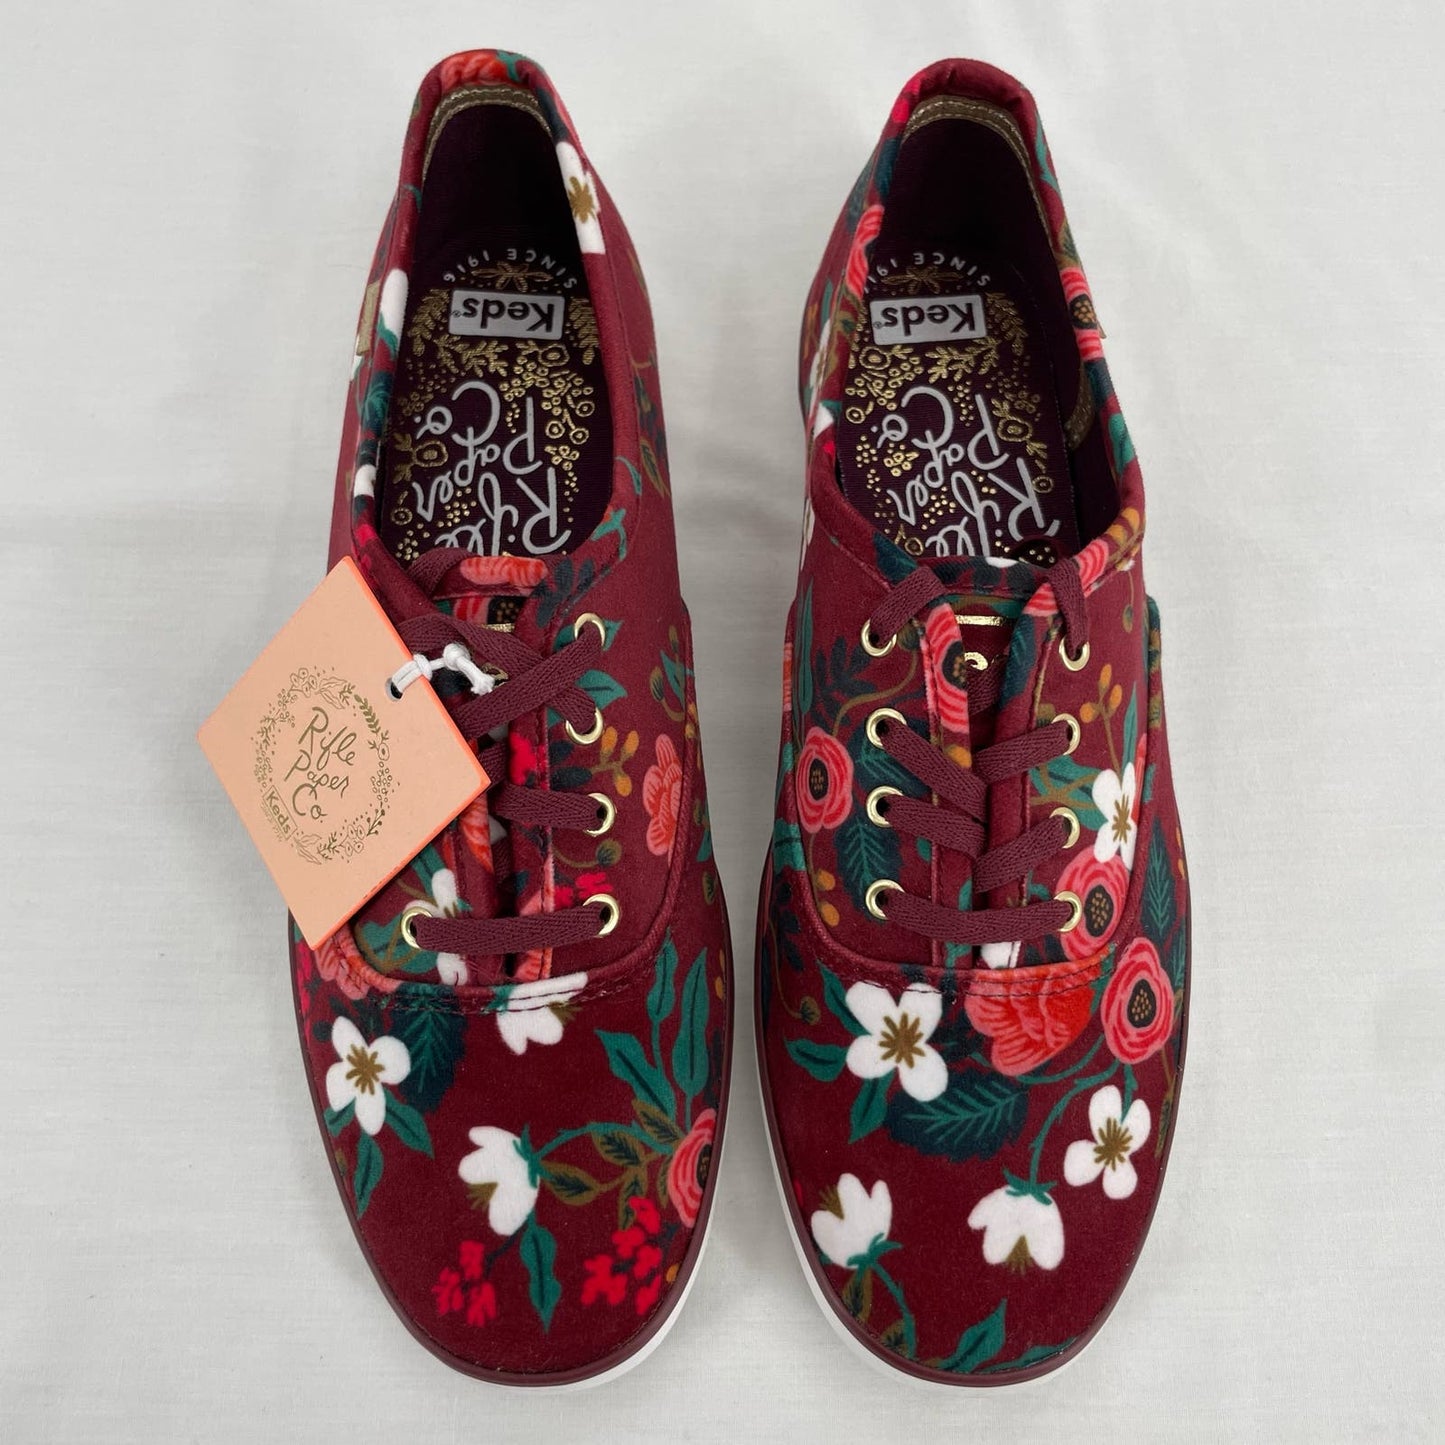 NEW Keds X Rifle Paper Co Sneakers Red Velvet Floral Garden Fall Flats Shoes Size 8.5